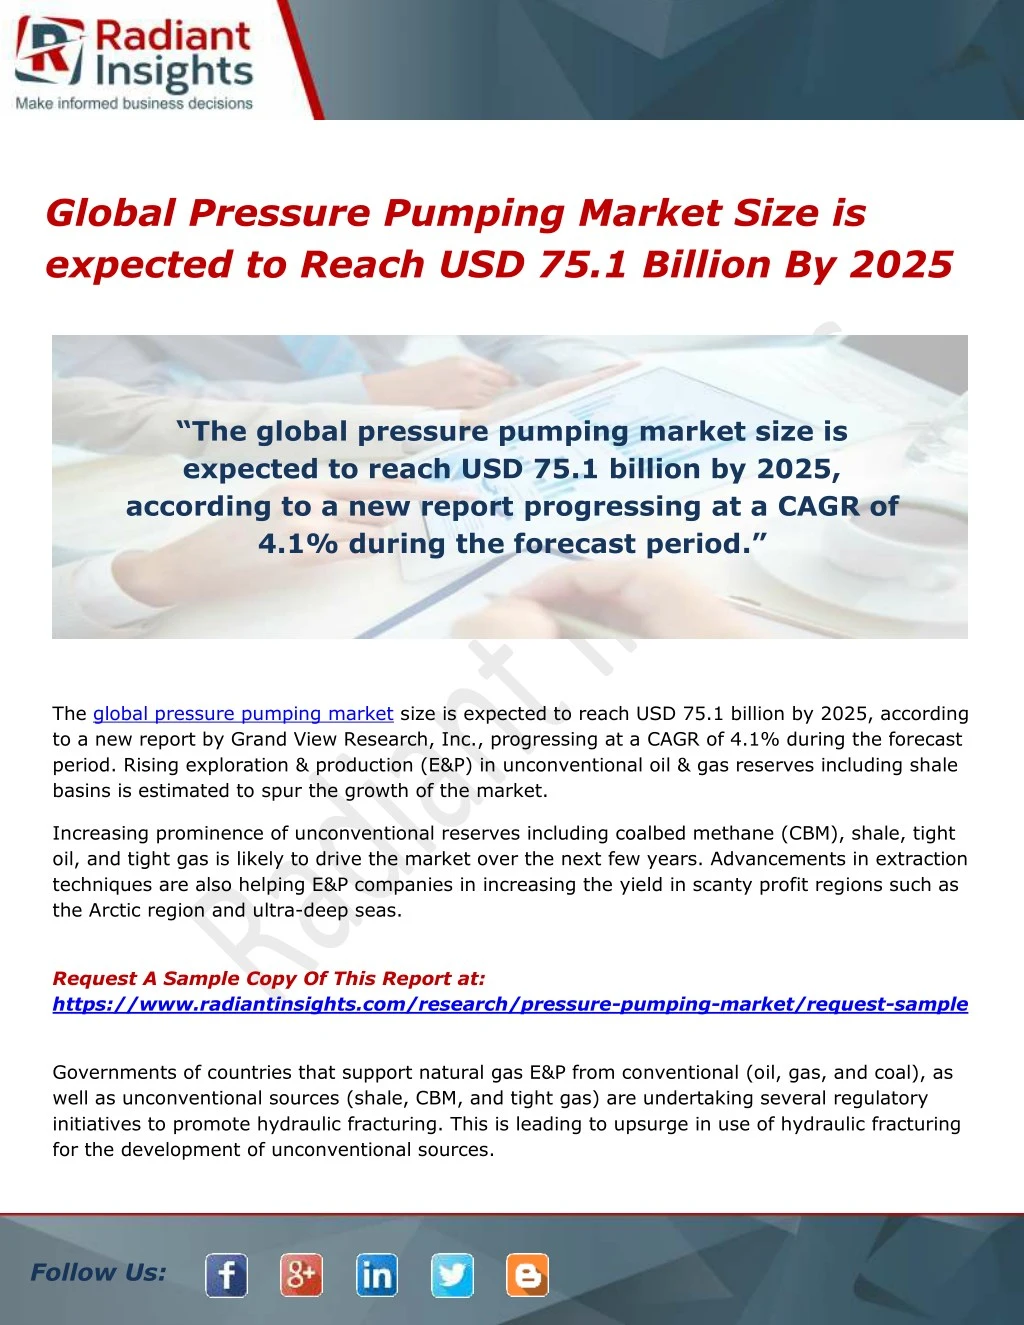 global pressure pumping market size is expected